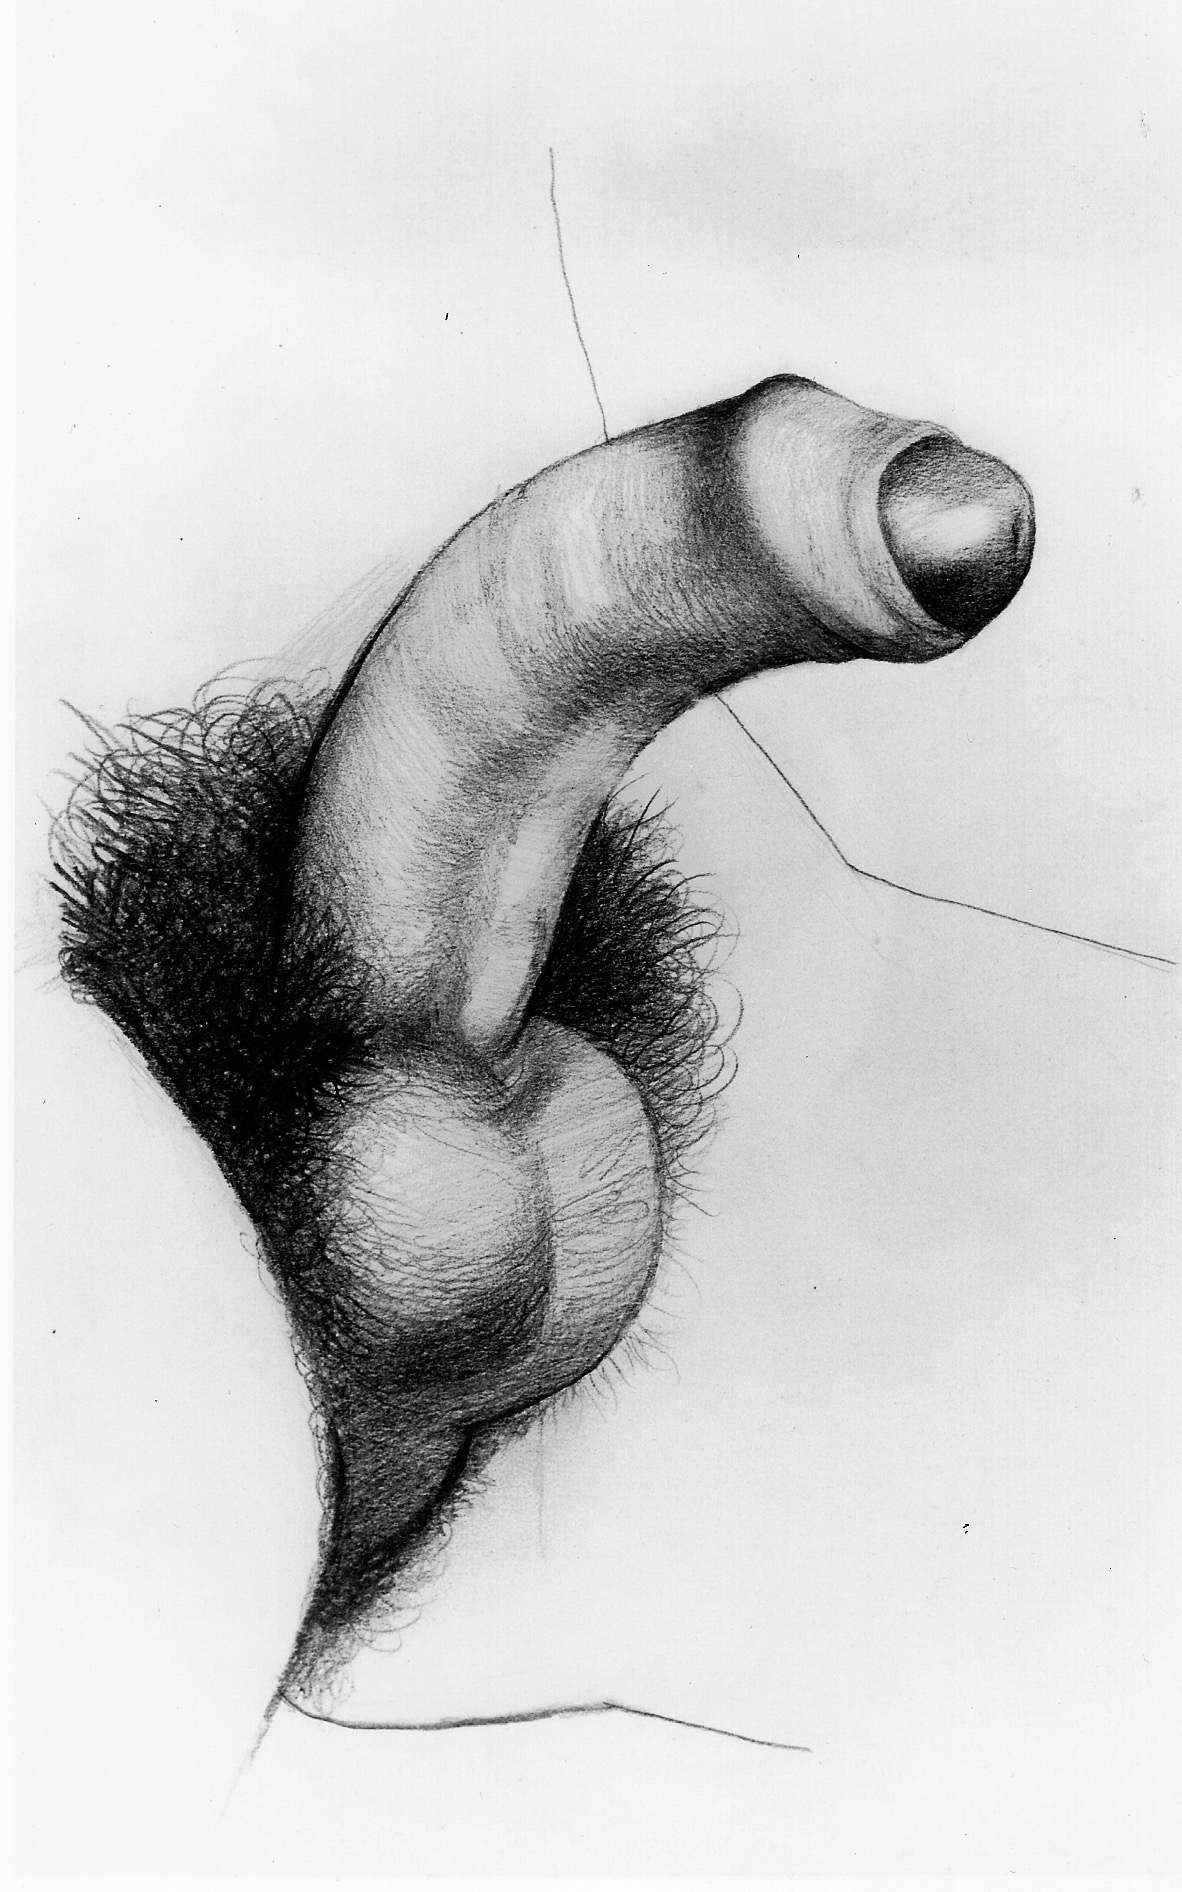 A Penis Drawing That Can Be Seen